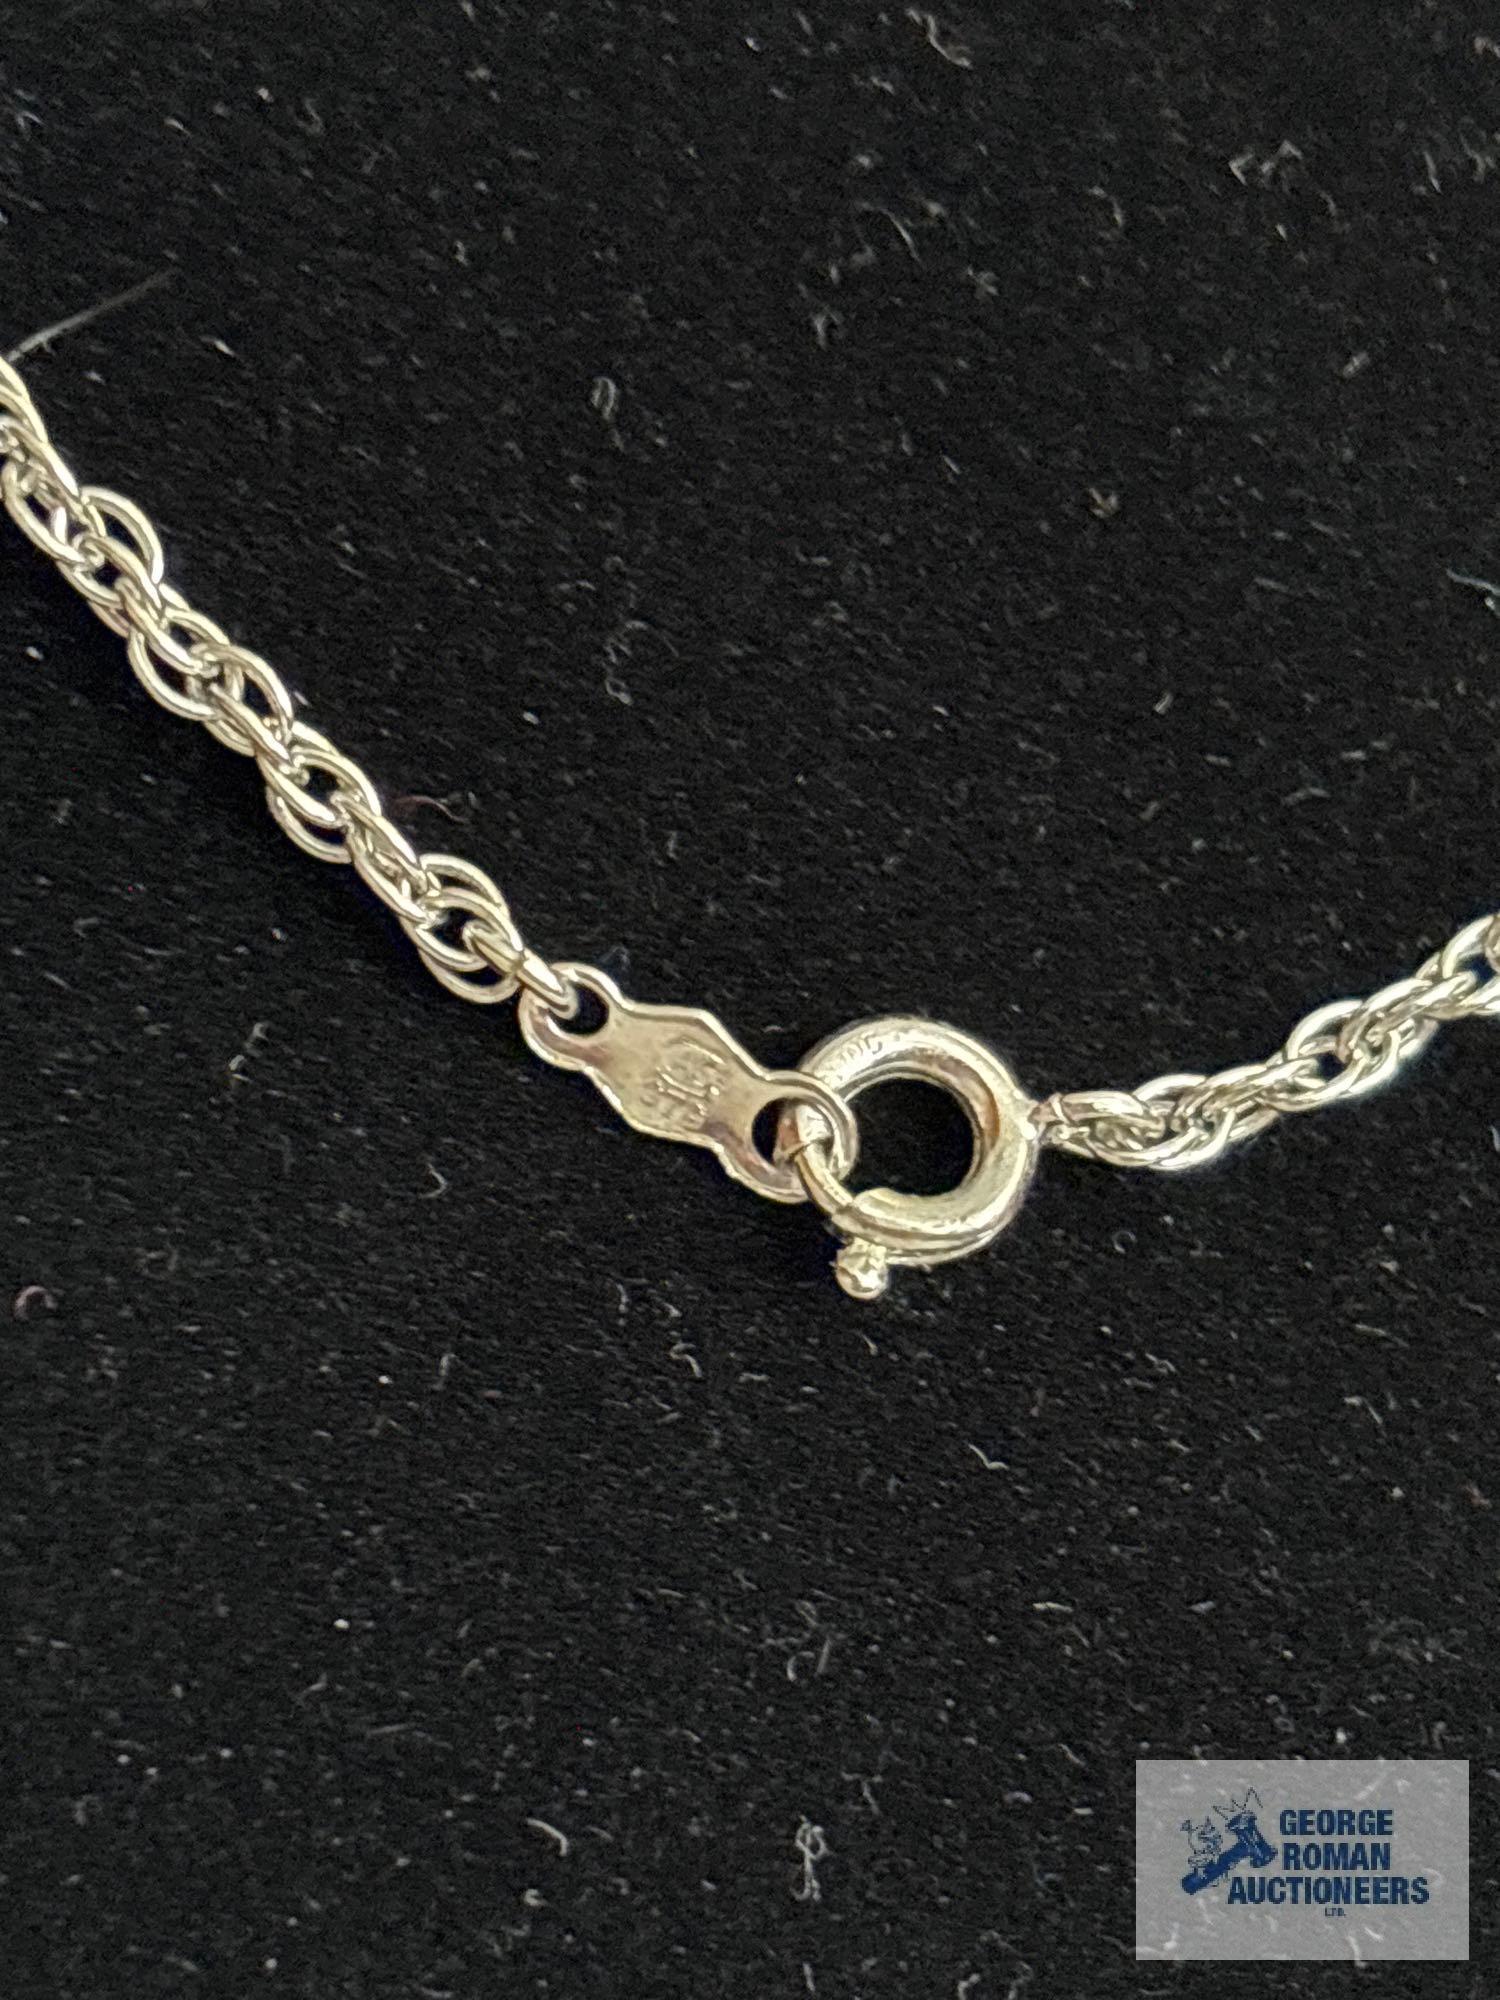 Silver colored rope chain, marked STG, approximate total weight is 4.47 G